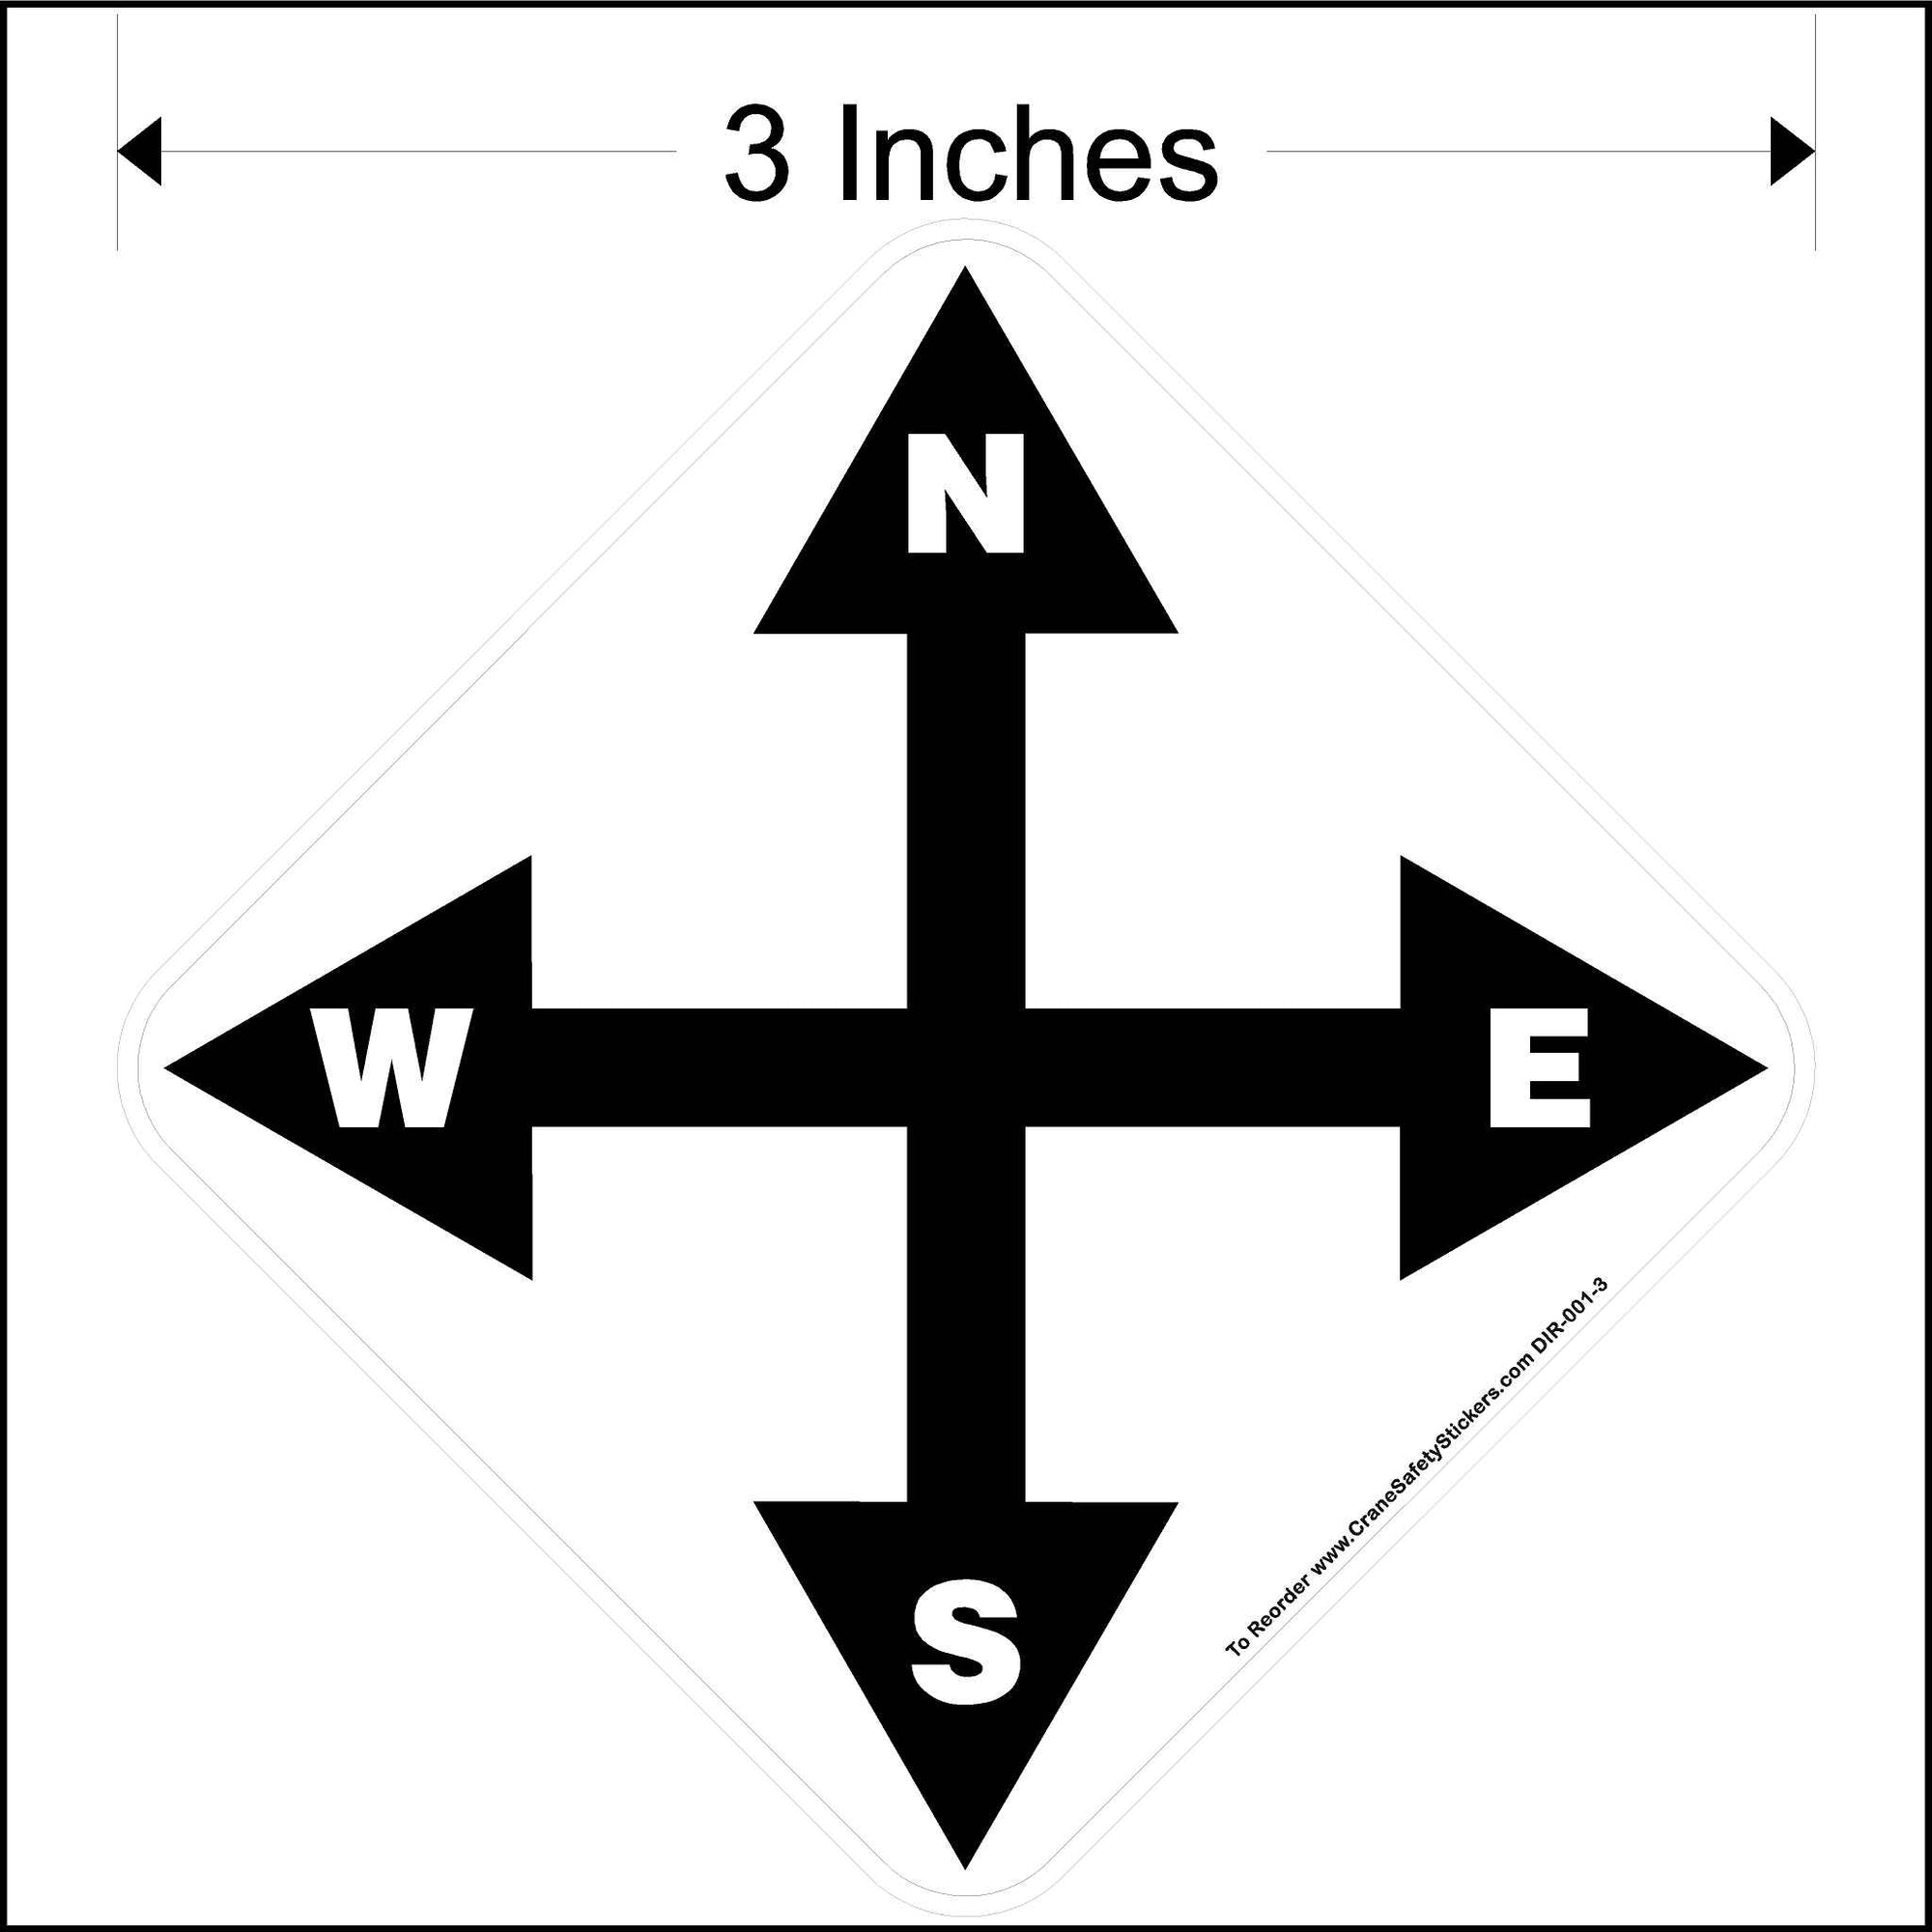 3 Inch North South East West Overhead Crane Directional Decal.